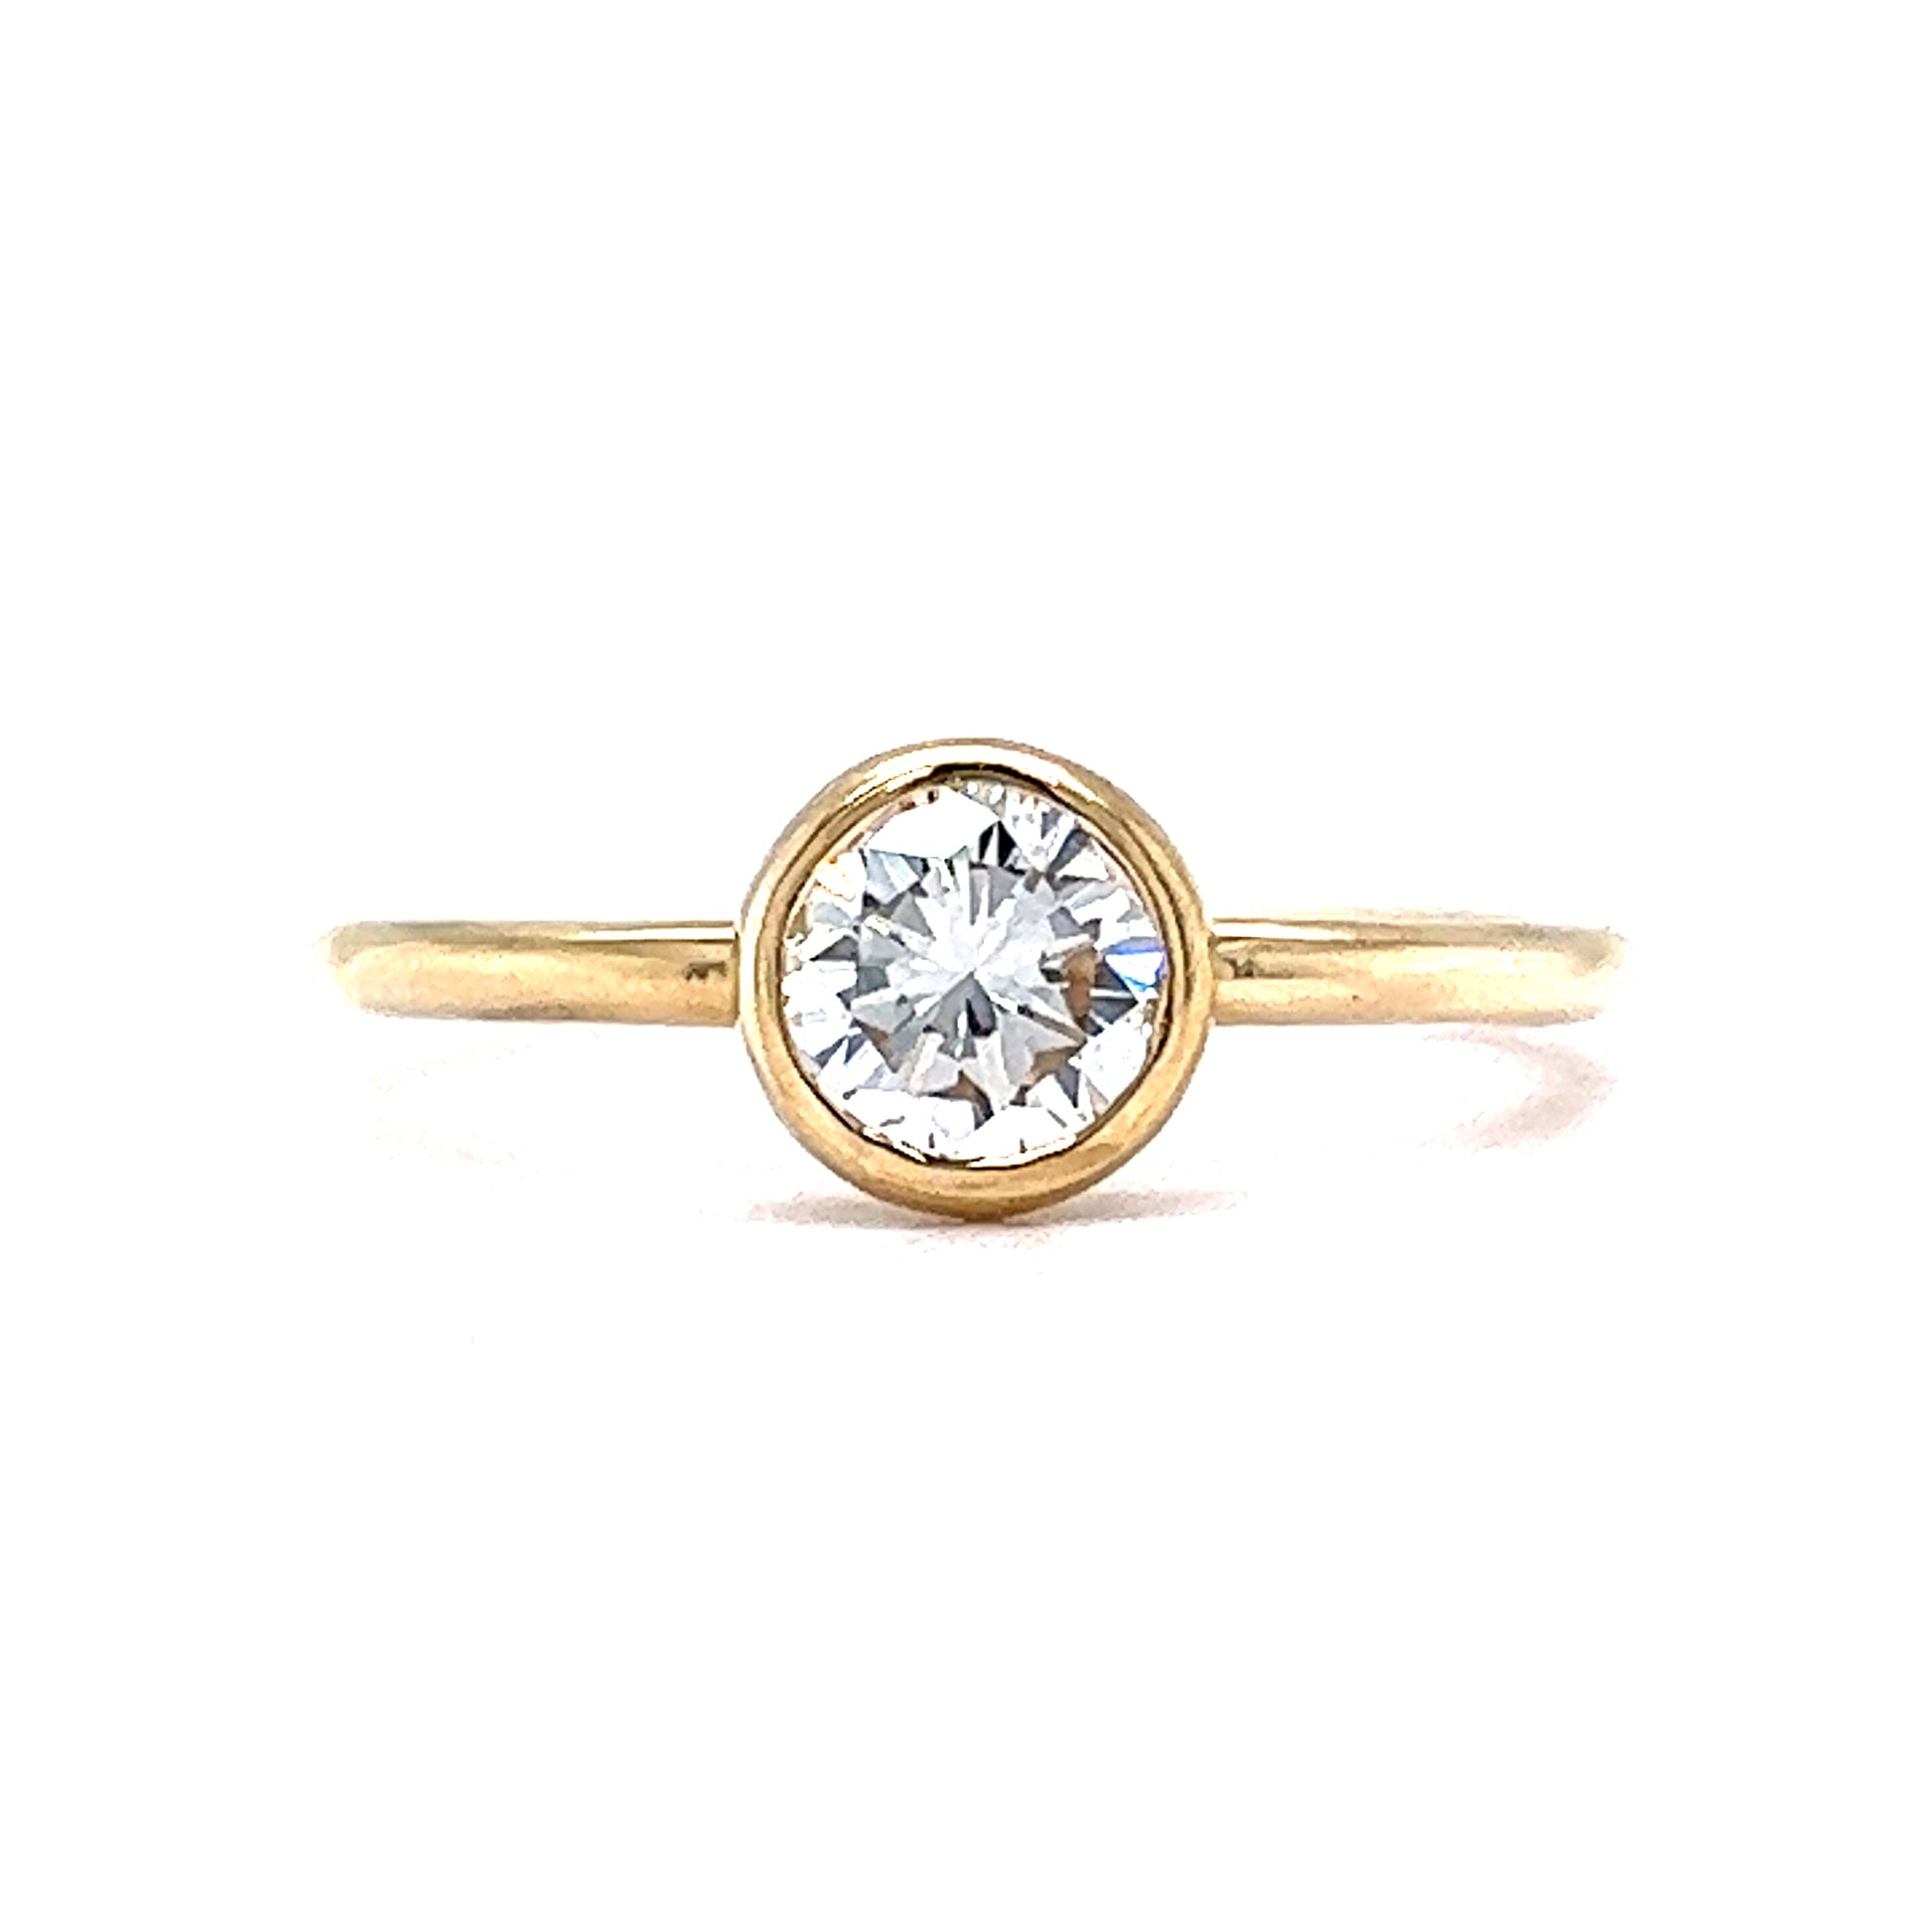 .72 Round Brilliant Bezel Engagement Ring in 14k Yellow GoldComposition: 14 Karat Yellow GoldRing Size: 7.0Total Diamond Weight: .72 ctTotal Gram Weight: 2.5 gInscription: 14k